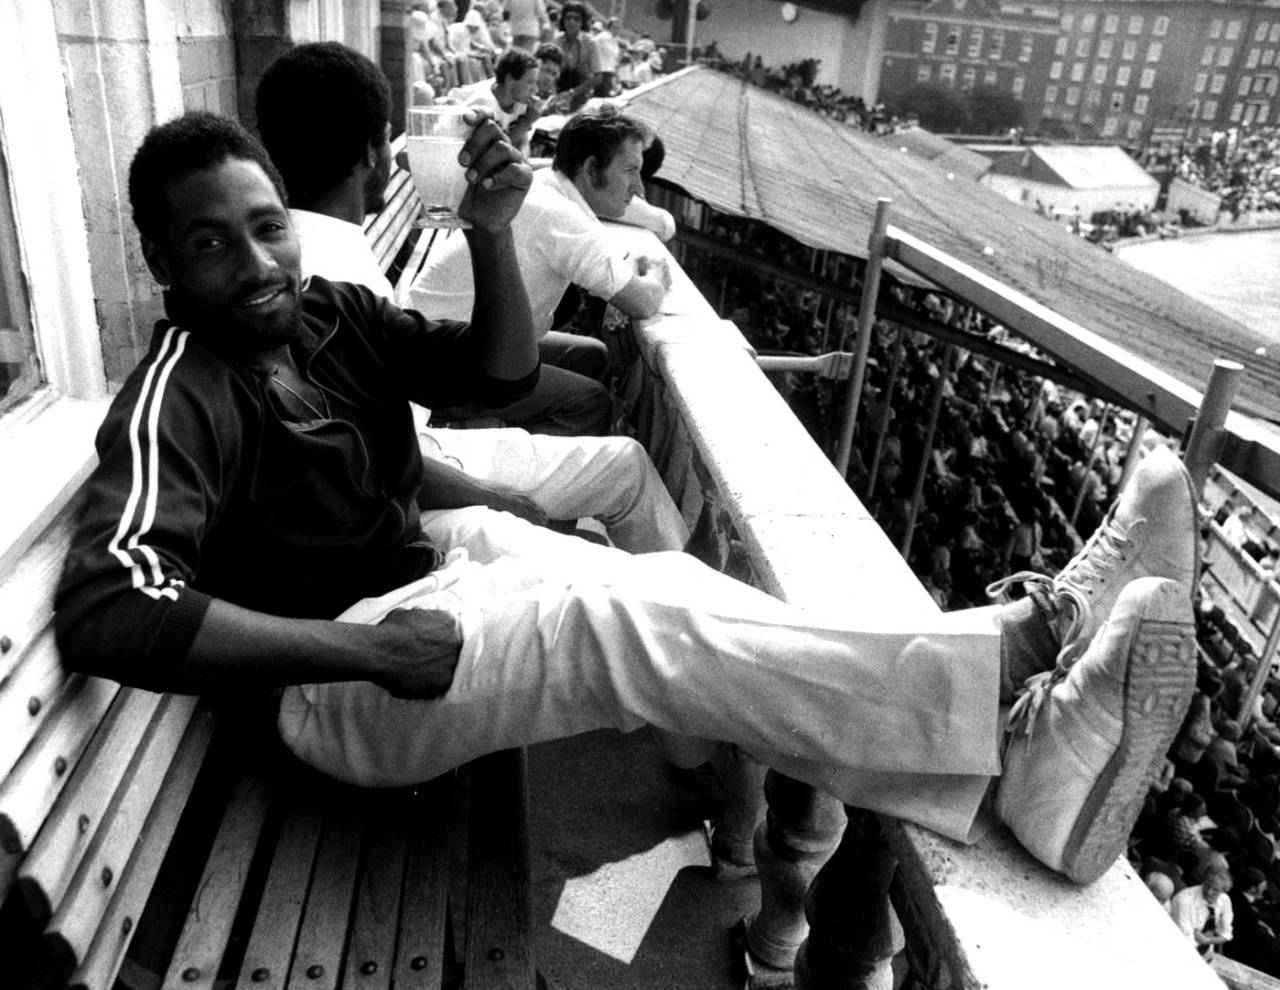 Viv Richards relaxing with a cold drink after his 291, England v West Indies, 5th Test, 2nd day, The Oval, August 13, 1976